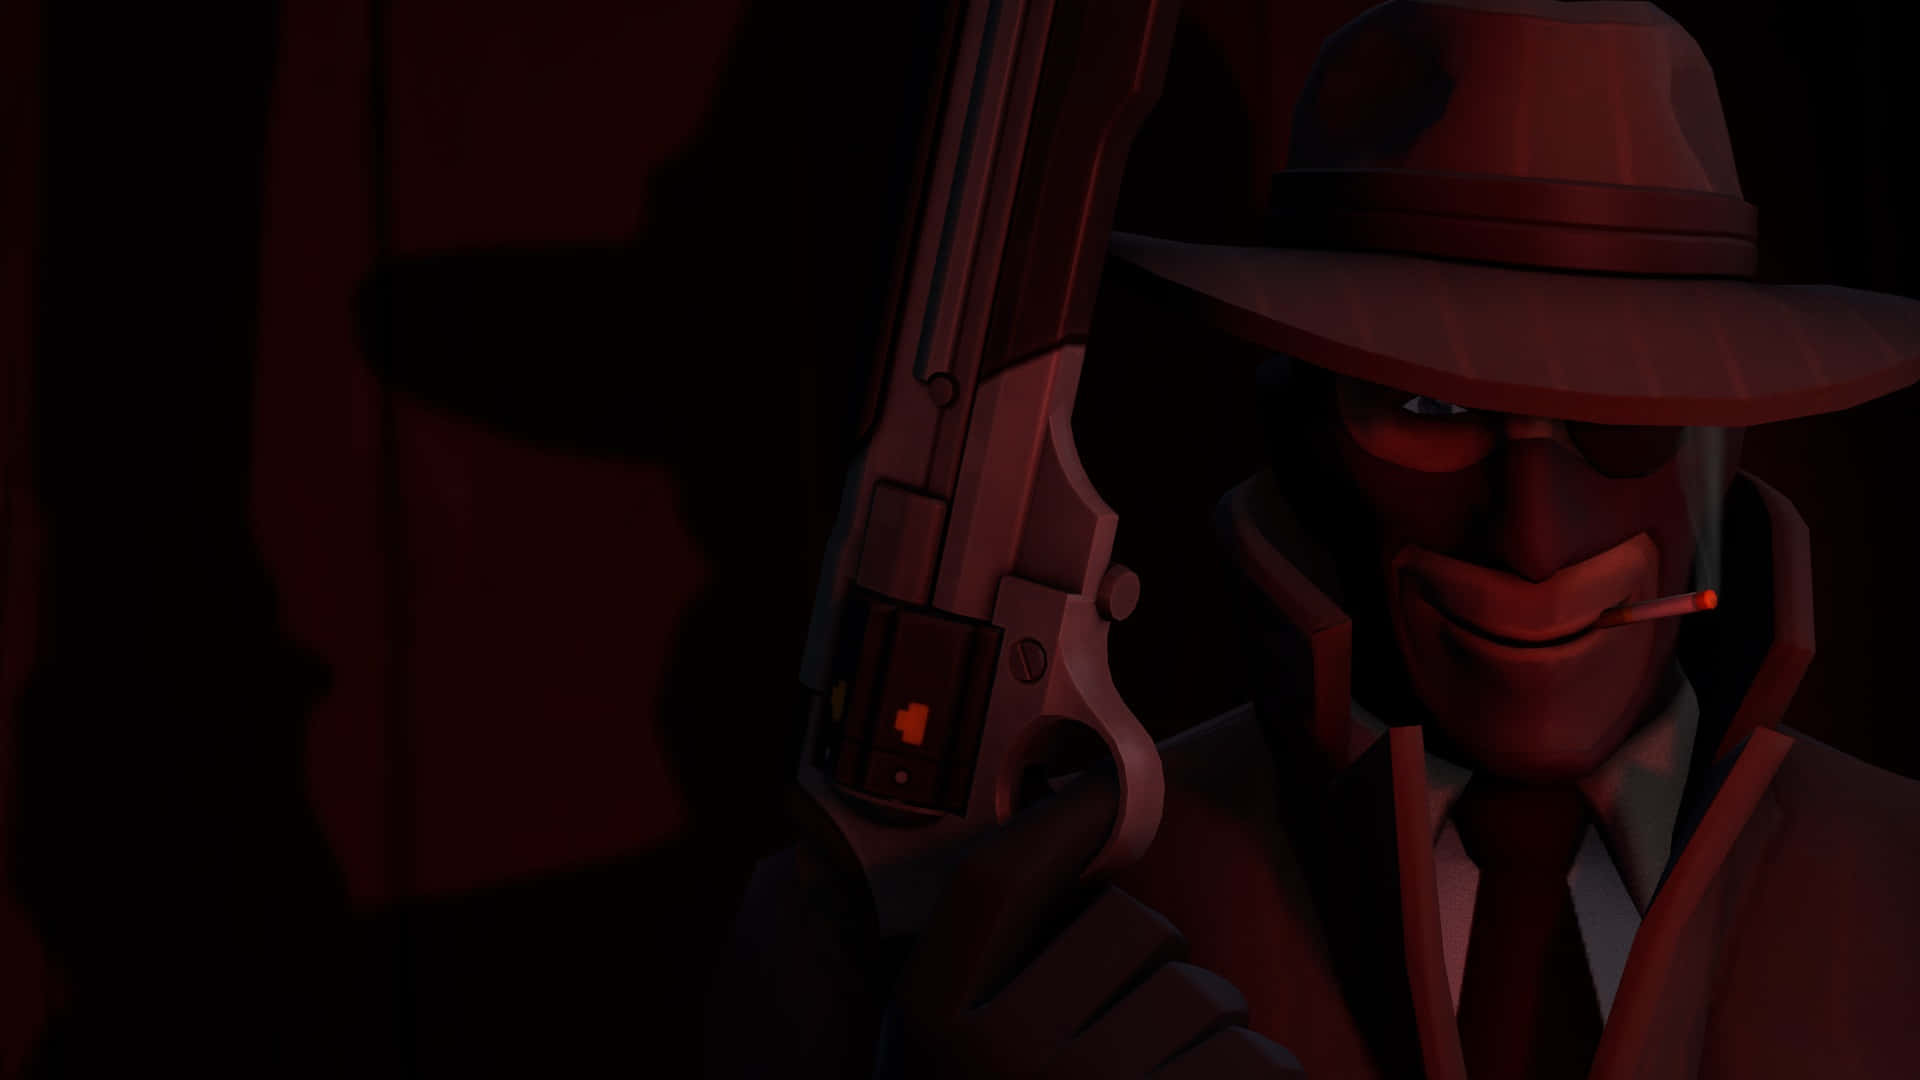 A Man In A Hat And Suit Holding A Gun